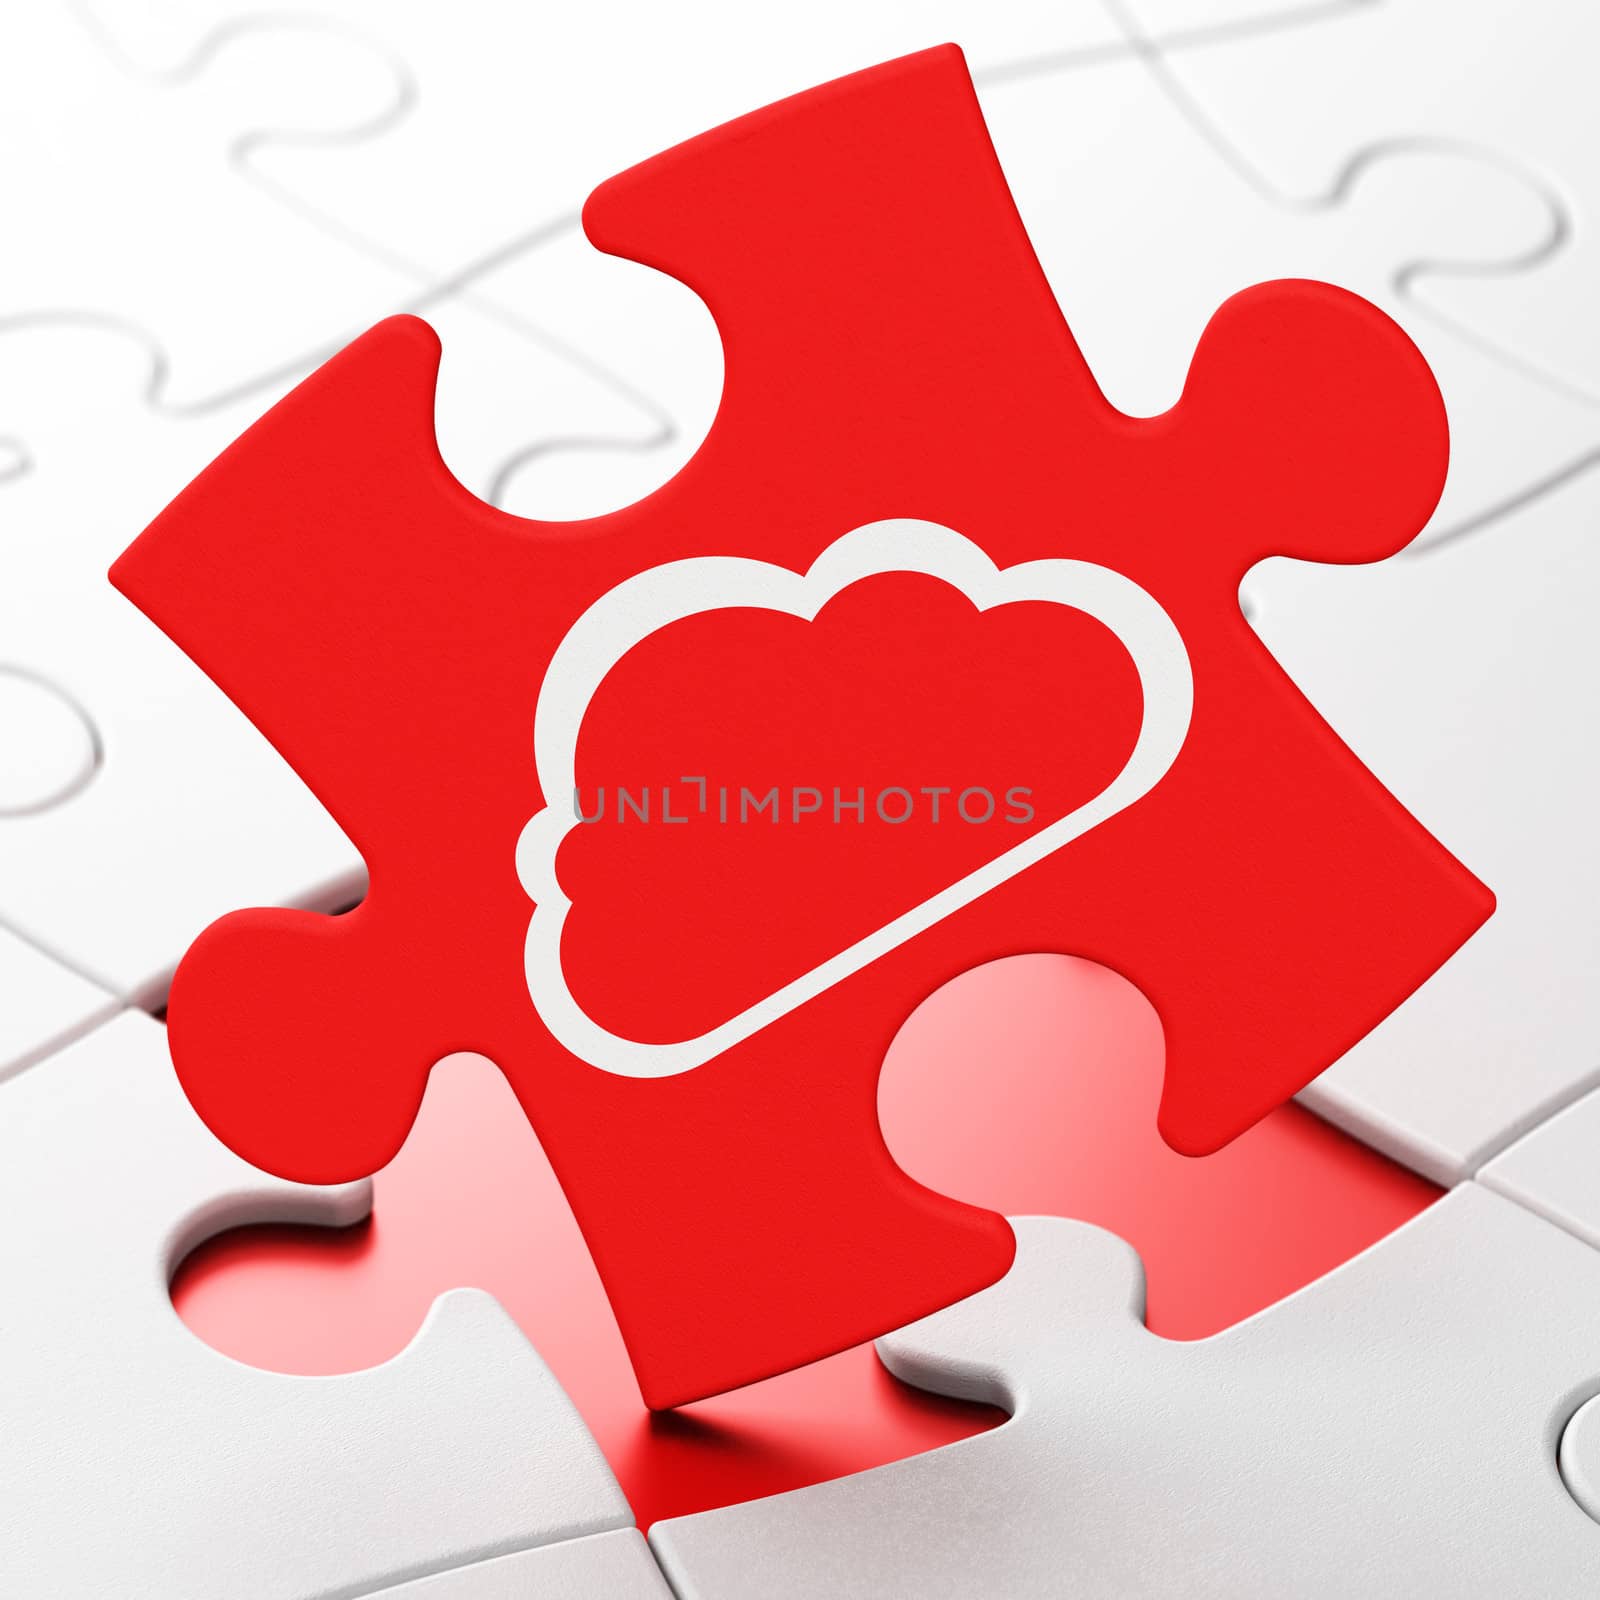 Cloud networking concept: Cloud on Red puzzle pieces background, 3d render